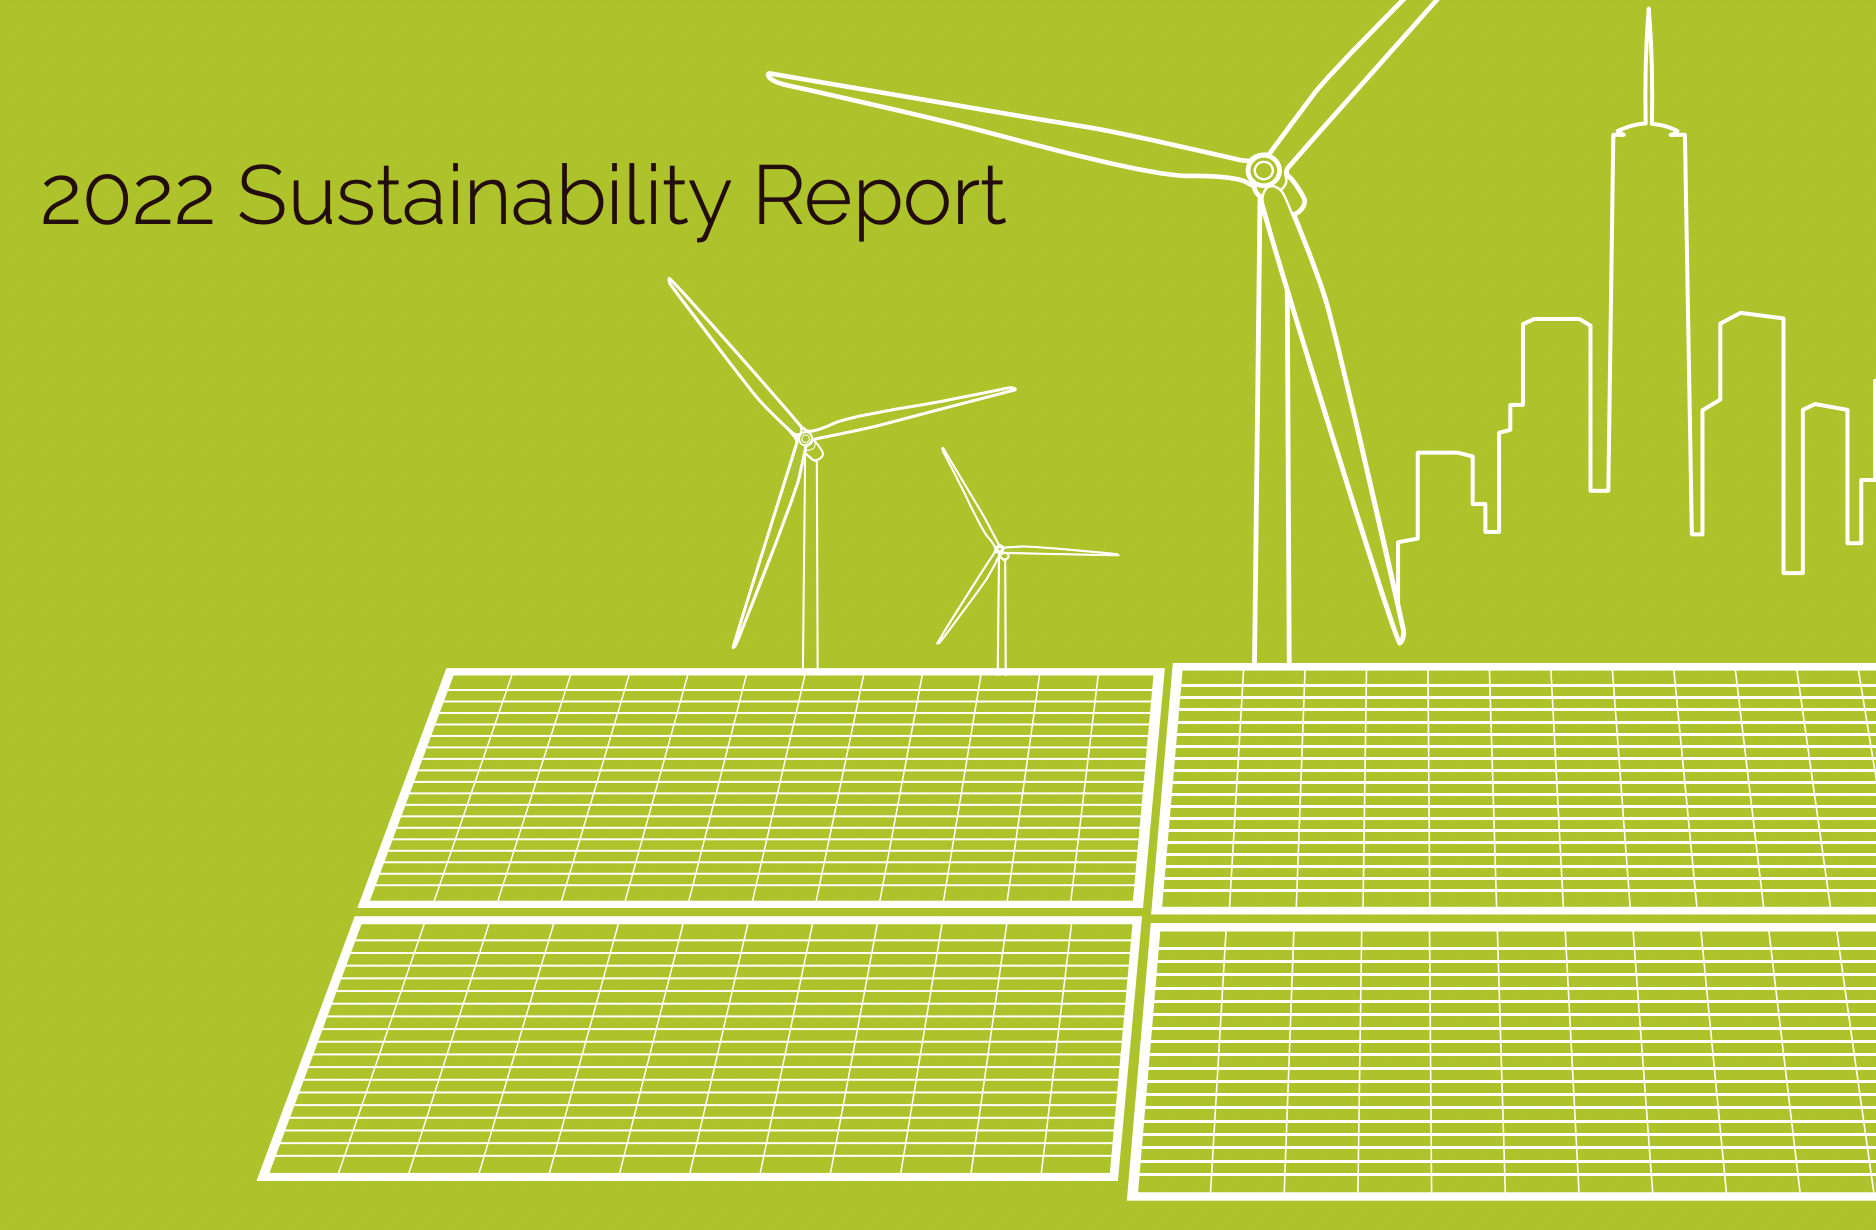 Black & Veatch’s Annual Sustainability Report - 2022